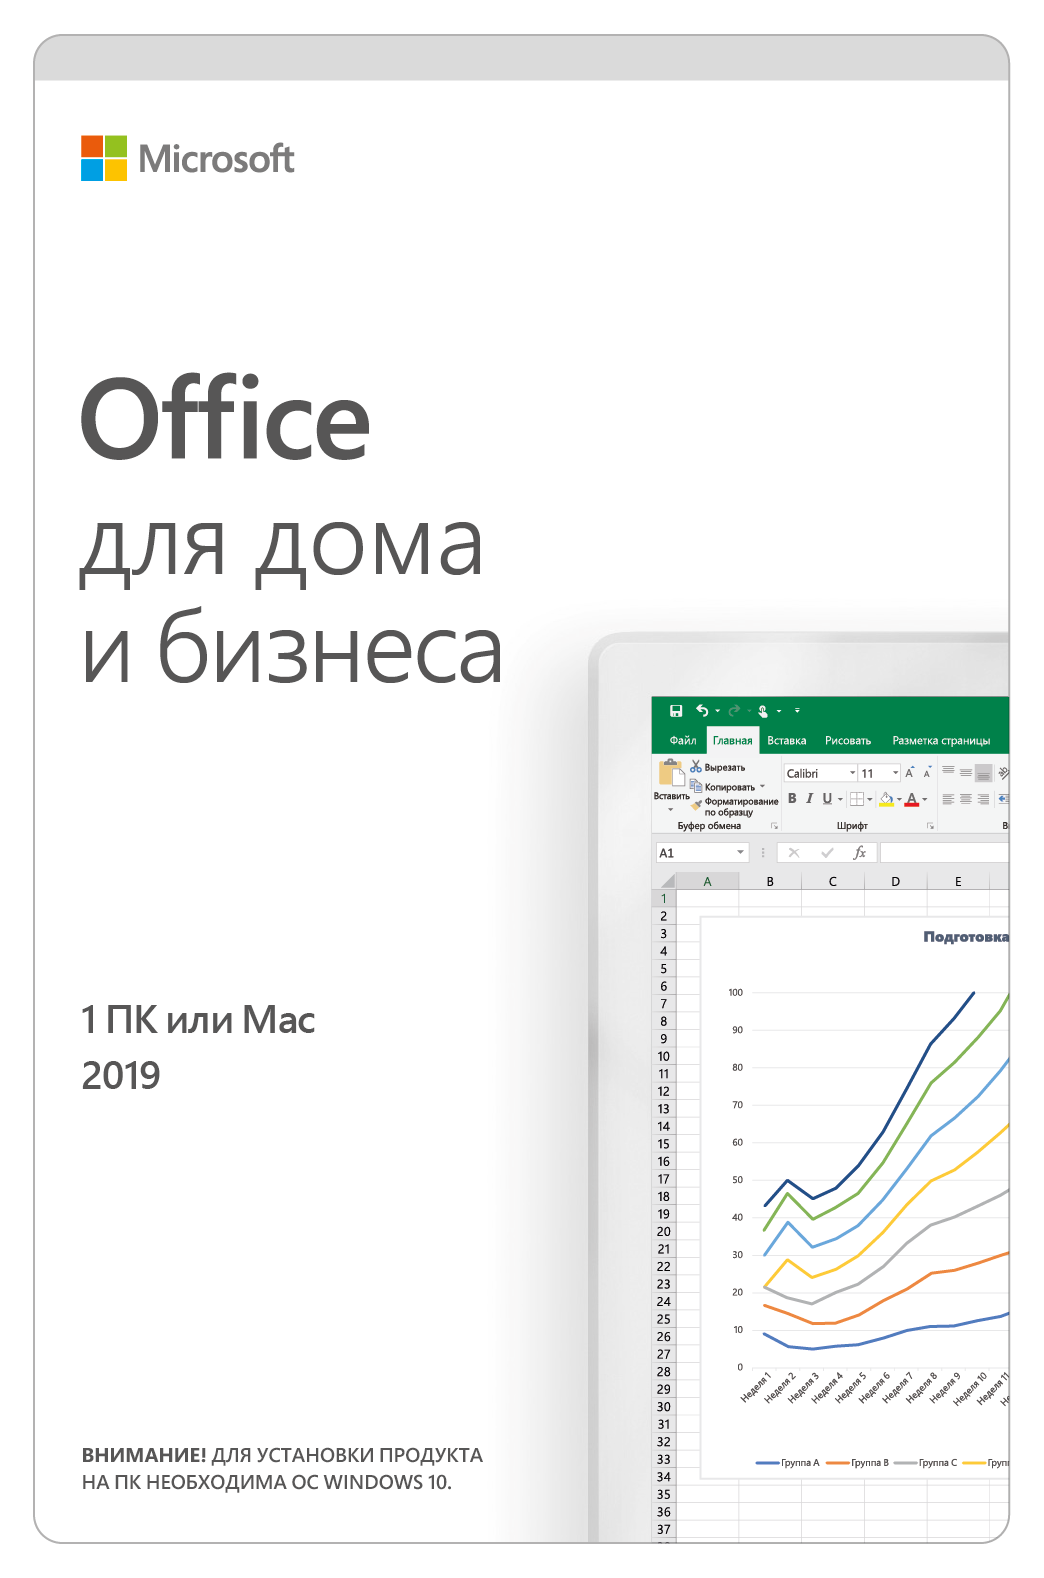 Home business 2021. Microsoft Office 2019 Home and Business. Microsoft Office 2021 Home and Business для Mac. Microsoft Office 2019 Home and Business, Box. Microsoft Office для дома и бизнеса 2021.